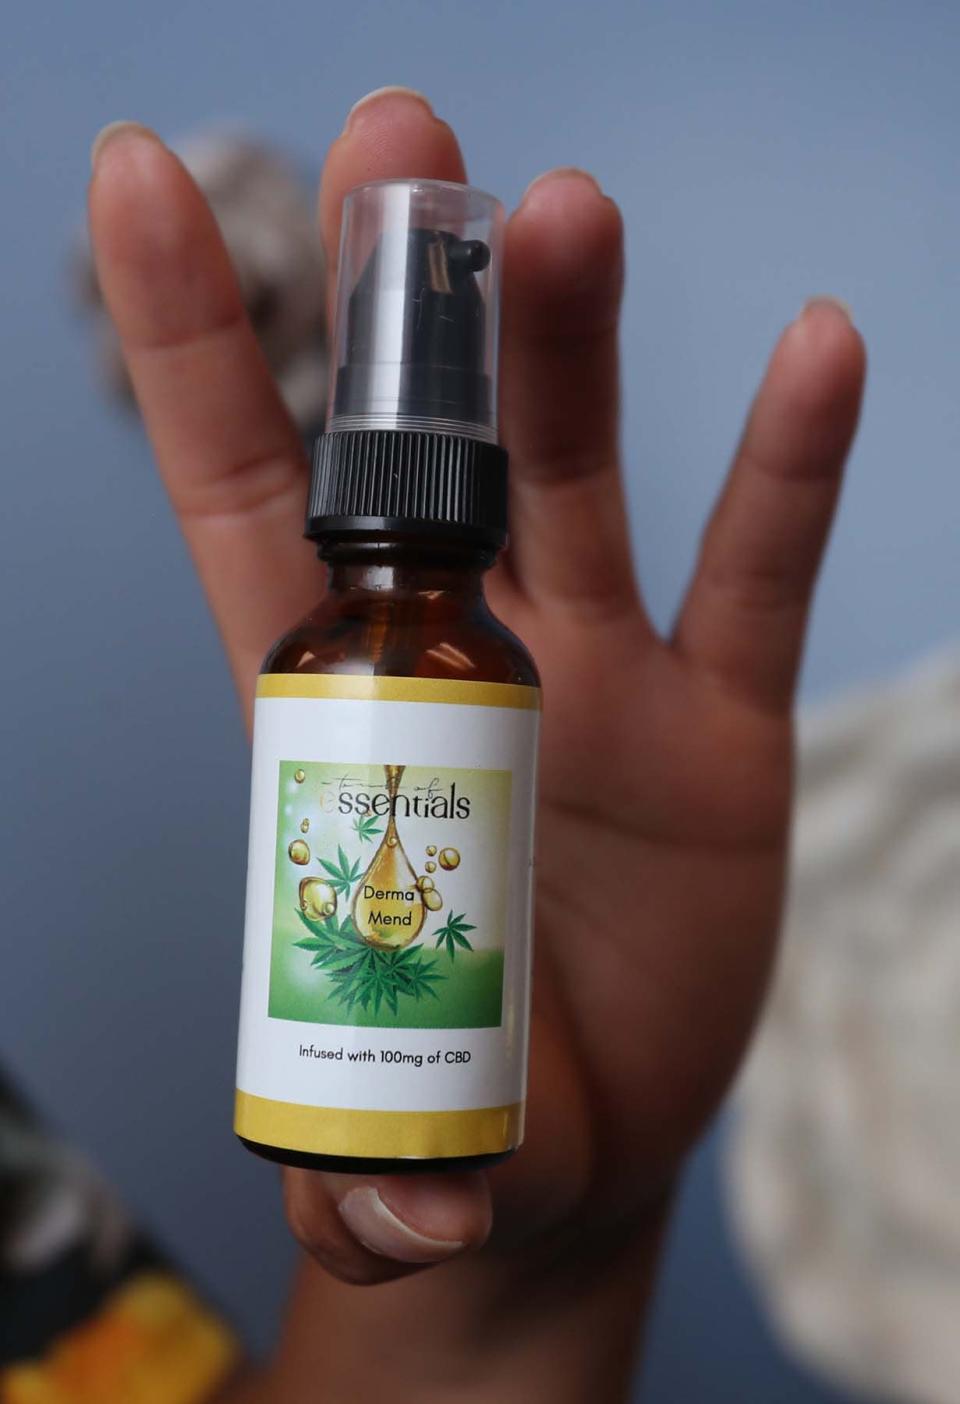 LPN Choyce Guice sells her own CBD oils to help relieve post-surgical pain and skin issues associated with cosmetic surgery.